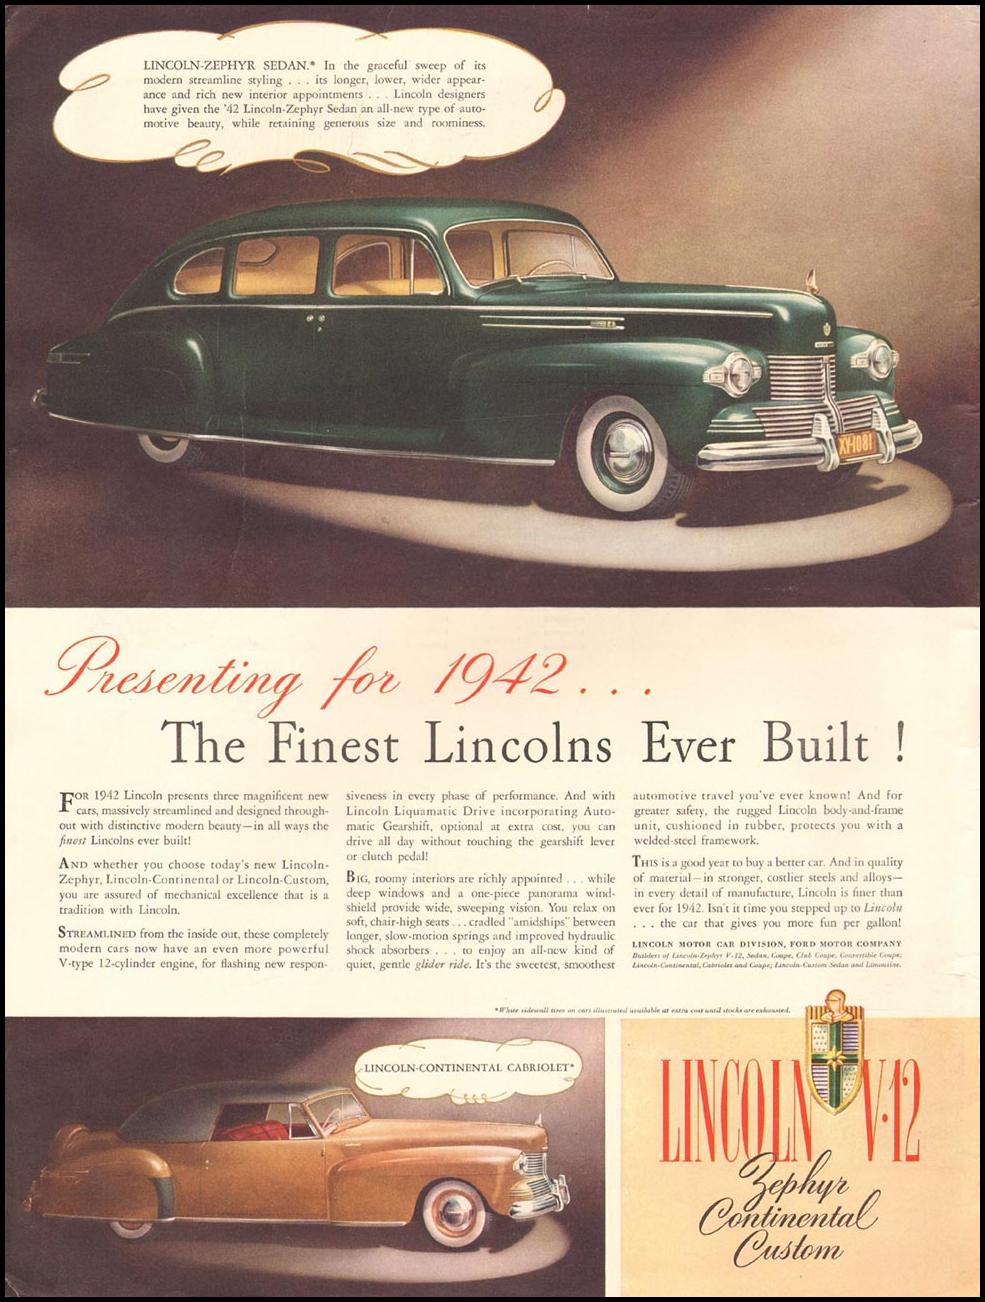 LINCOLN AUTOMOBILES
LIFE
09/29/1941
INSIDE FRONT